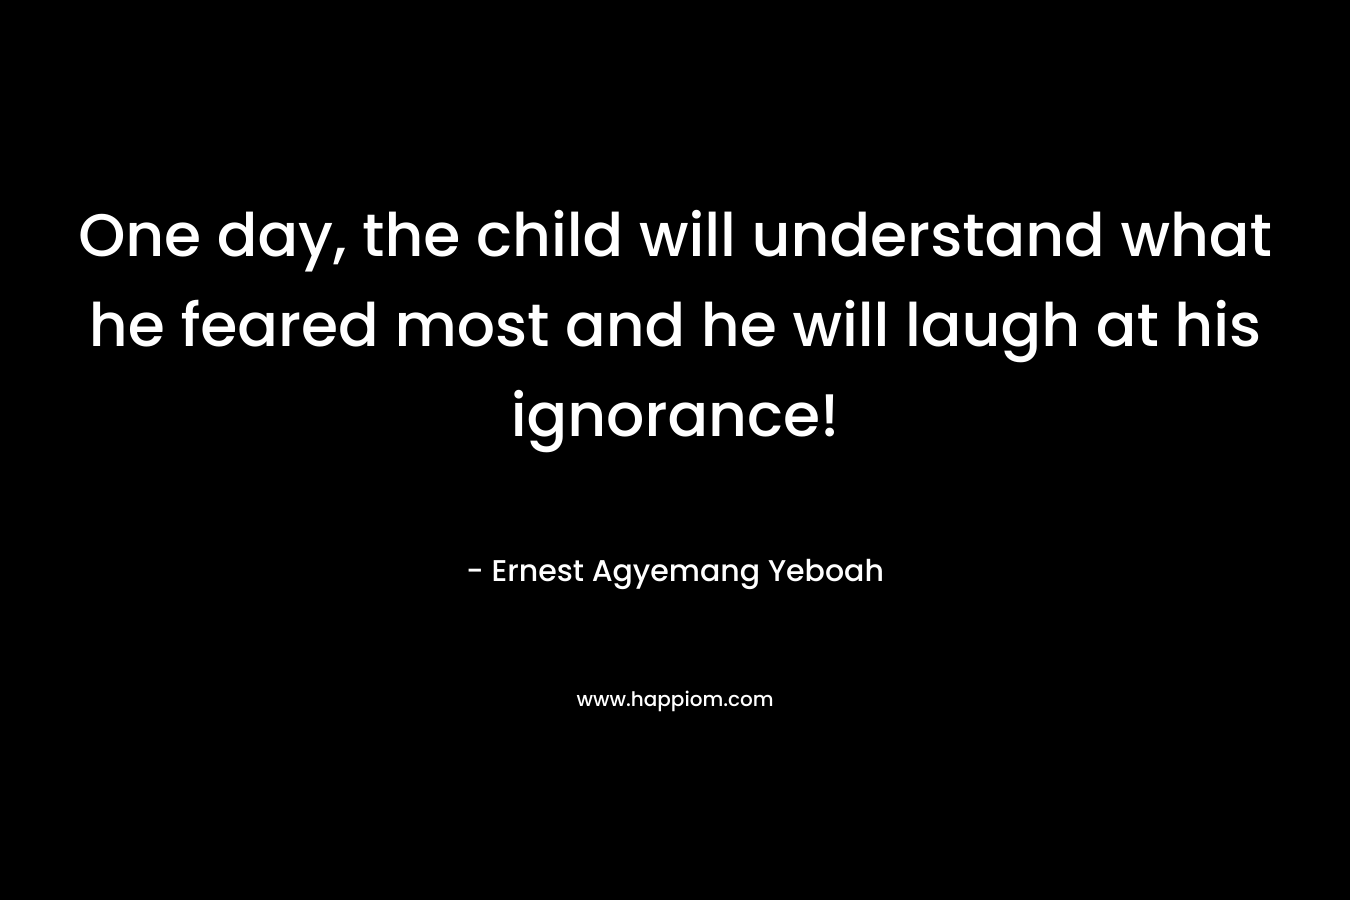 One day, the child will understand what he feared most and he will laugh at his ignorance!